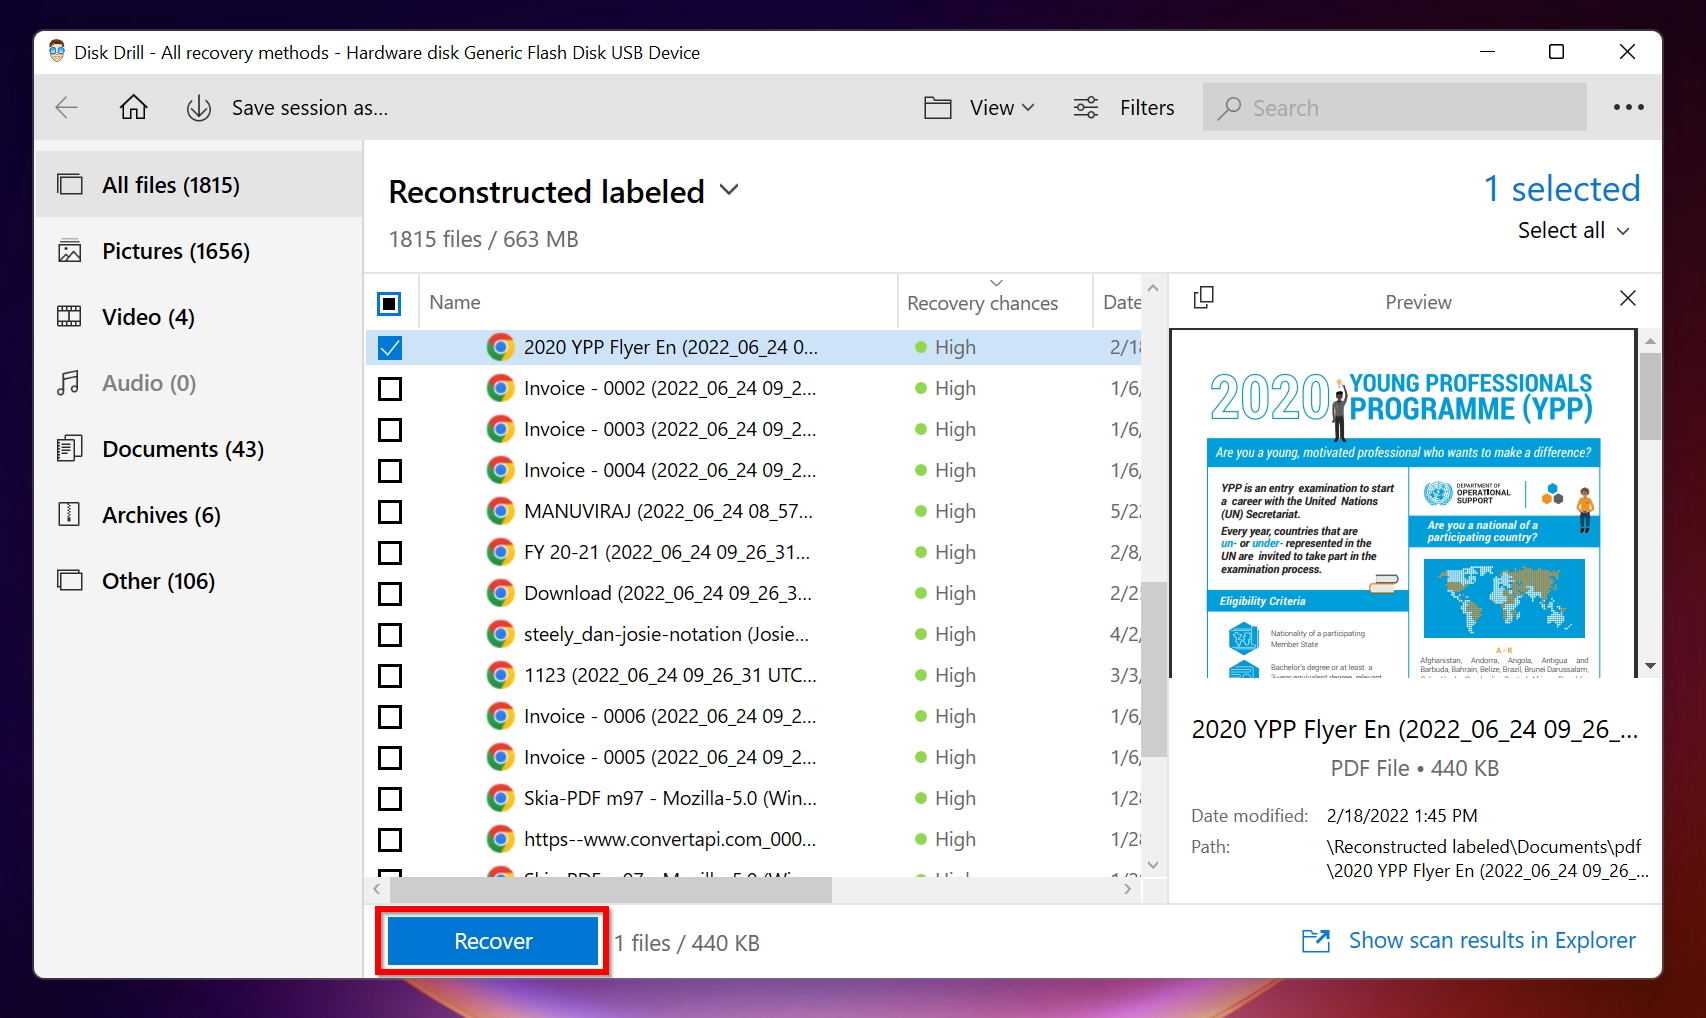 Select files to recover screen in Disk Drill.